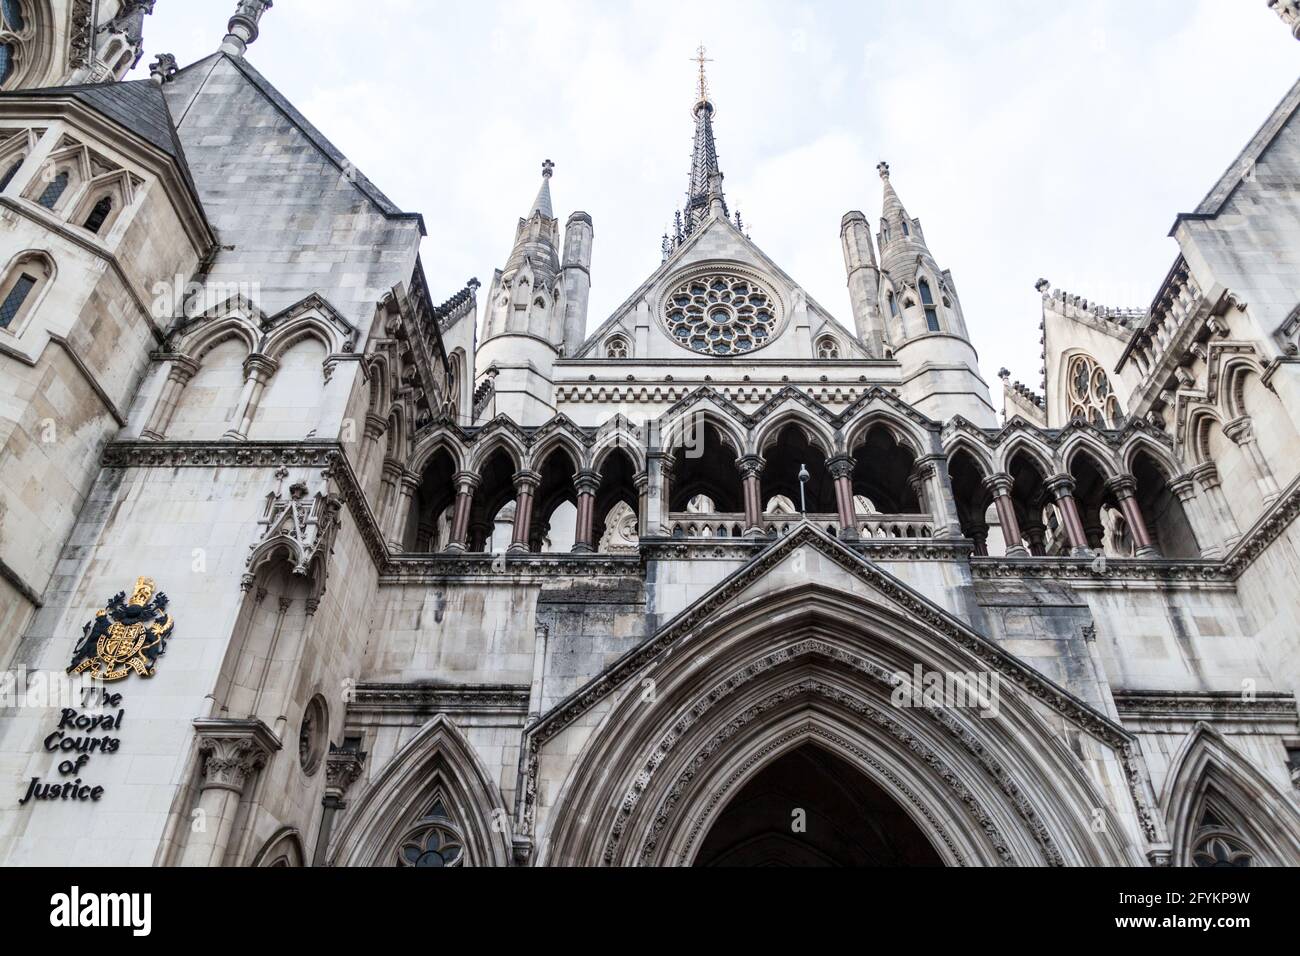 Royal Courts of Justice building in London, United Kingdom Stock Photo